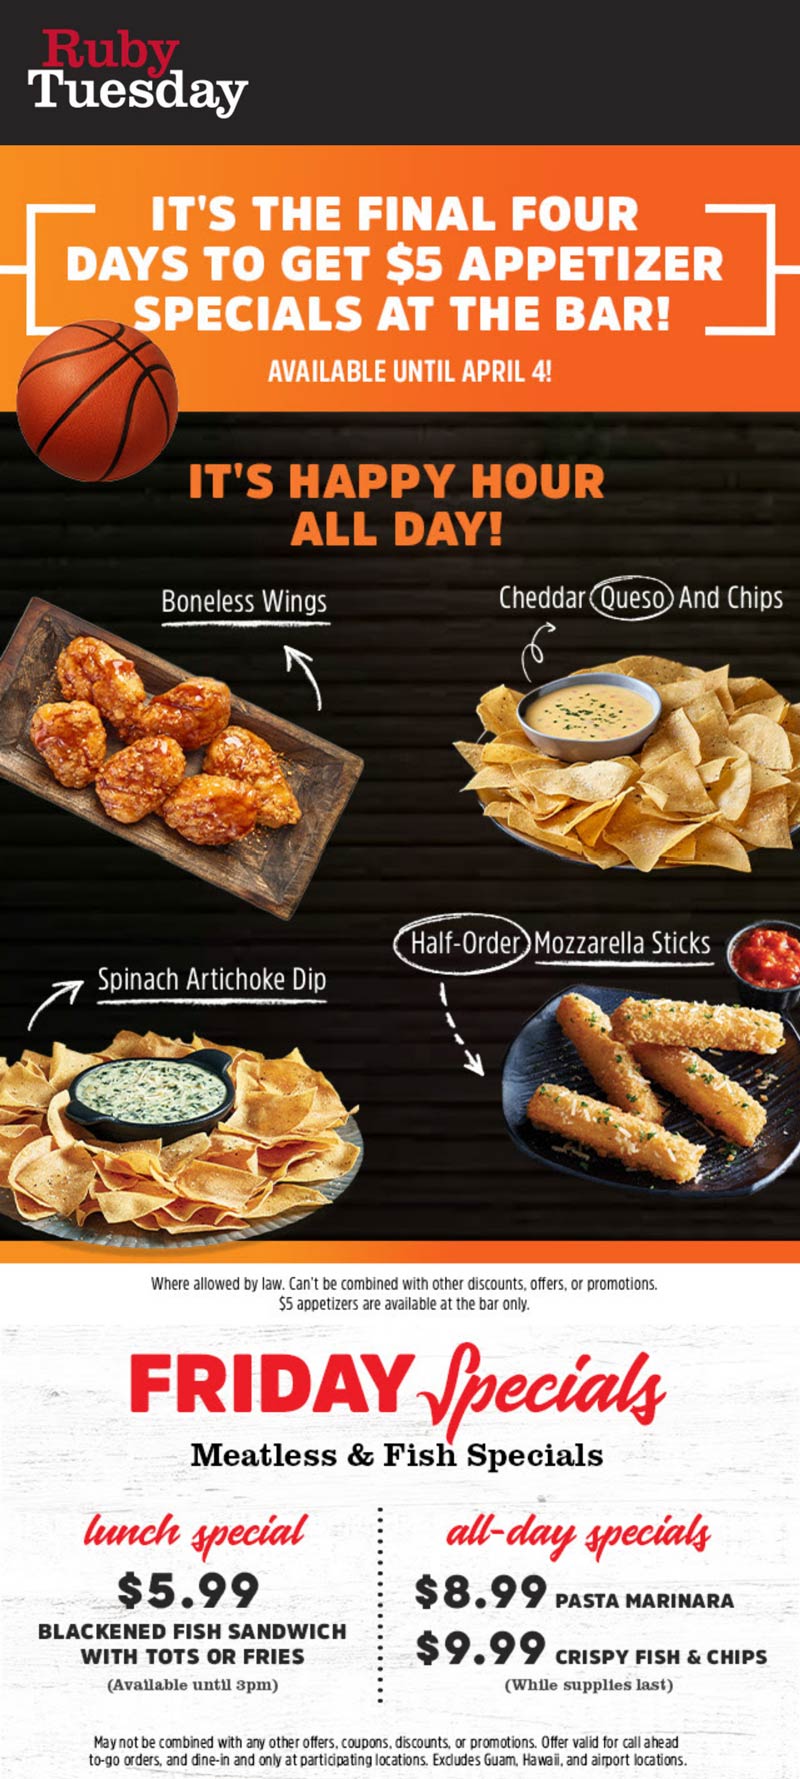 Ruby Tuesday restaurants Coupon  $5 appetizers at the bar at Ruby Tuesday restaurants #rubytuesday 